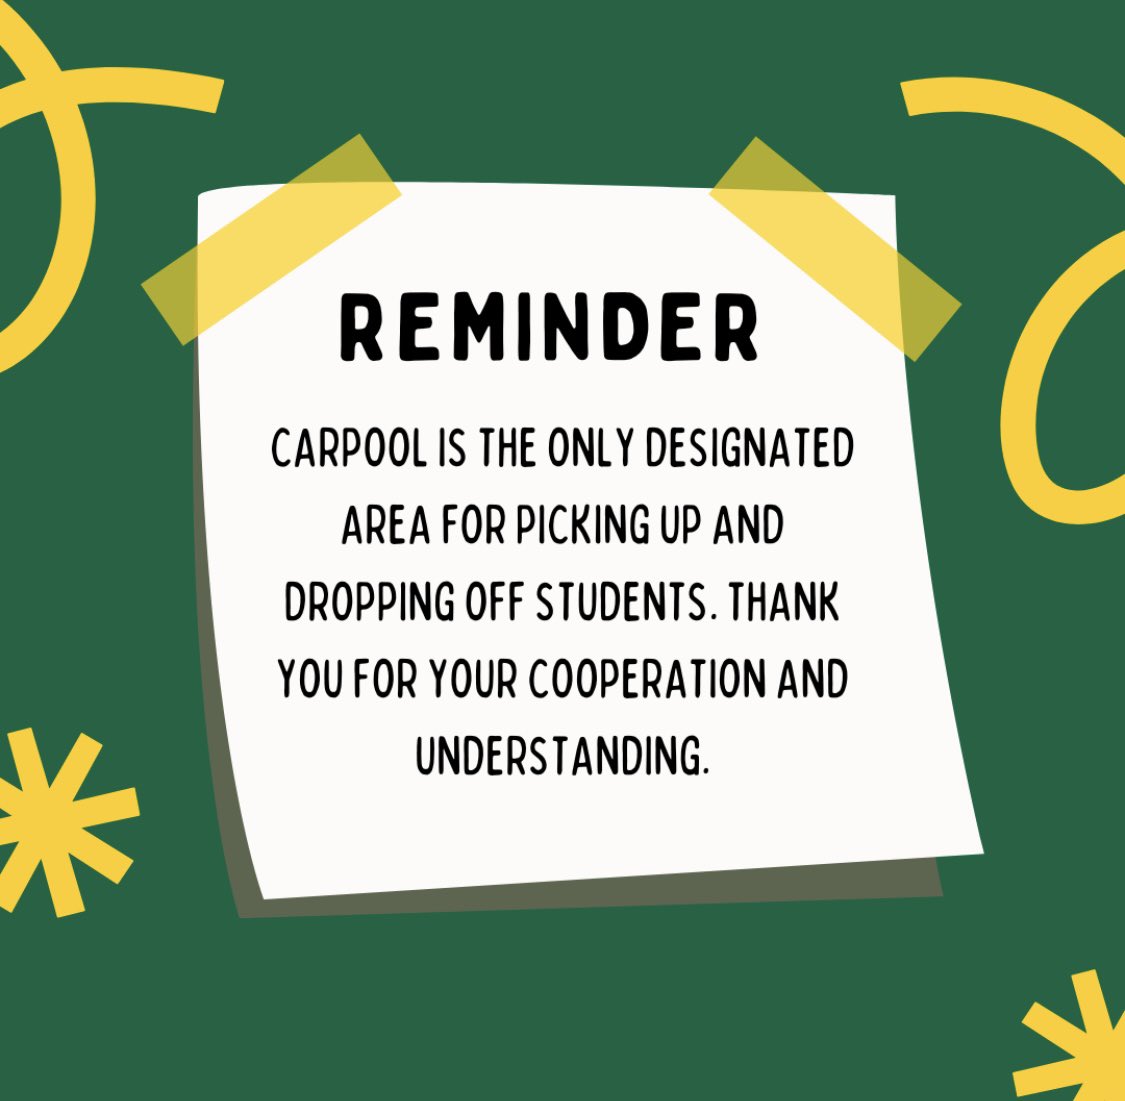 Important Reminder: Carpool is the only designated area for picking up and dropping off students. Safety and security are our top priorities, and utilizing the carpool lane helps us ensure the well-being of every Enloe Eagle.